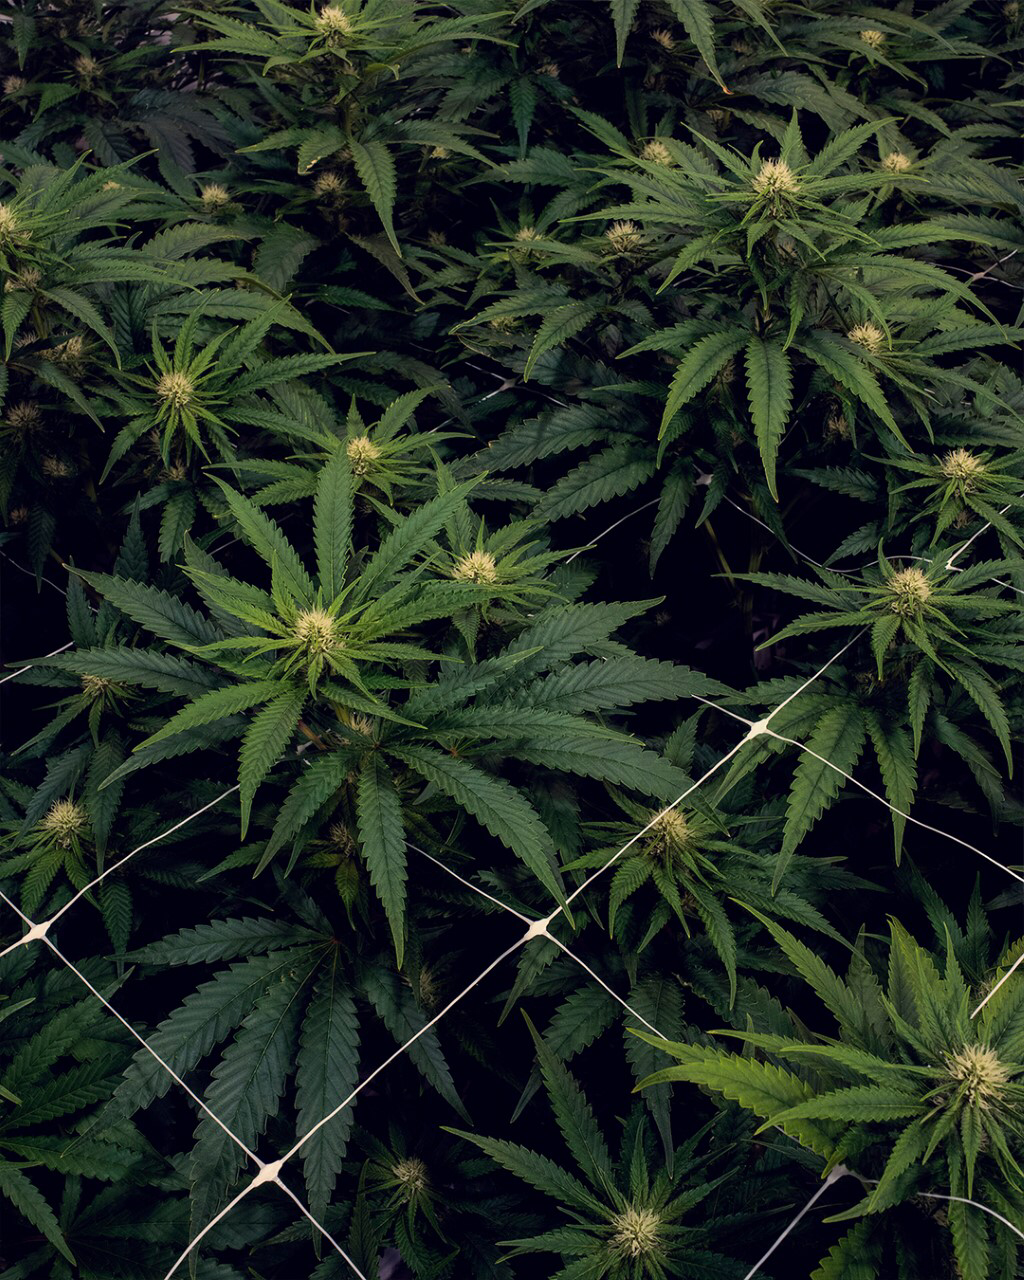 Cannabis Plants in bloom showing flowers